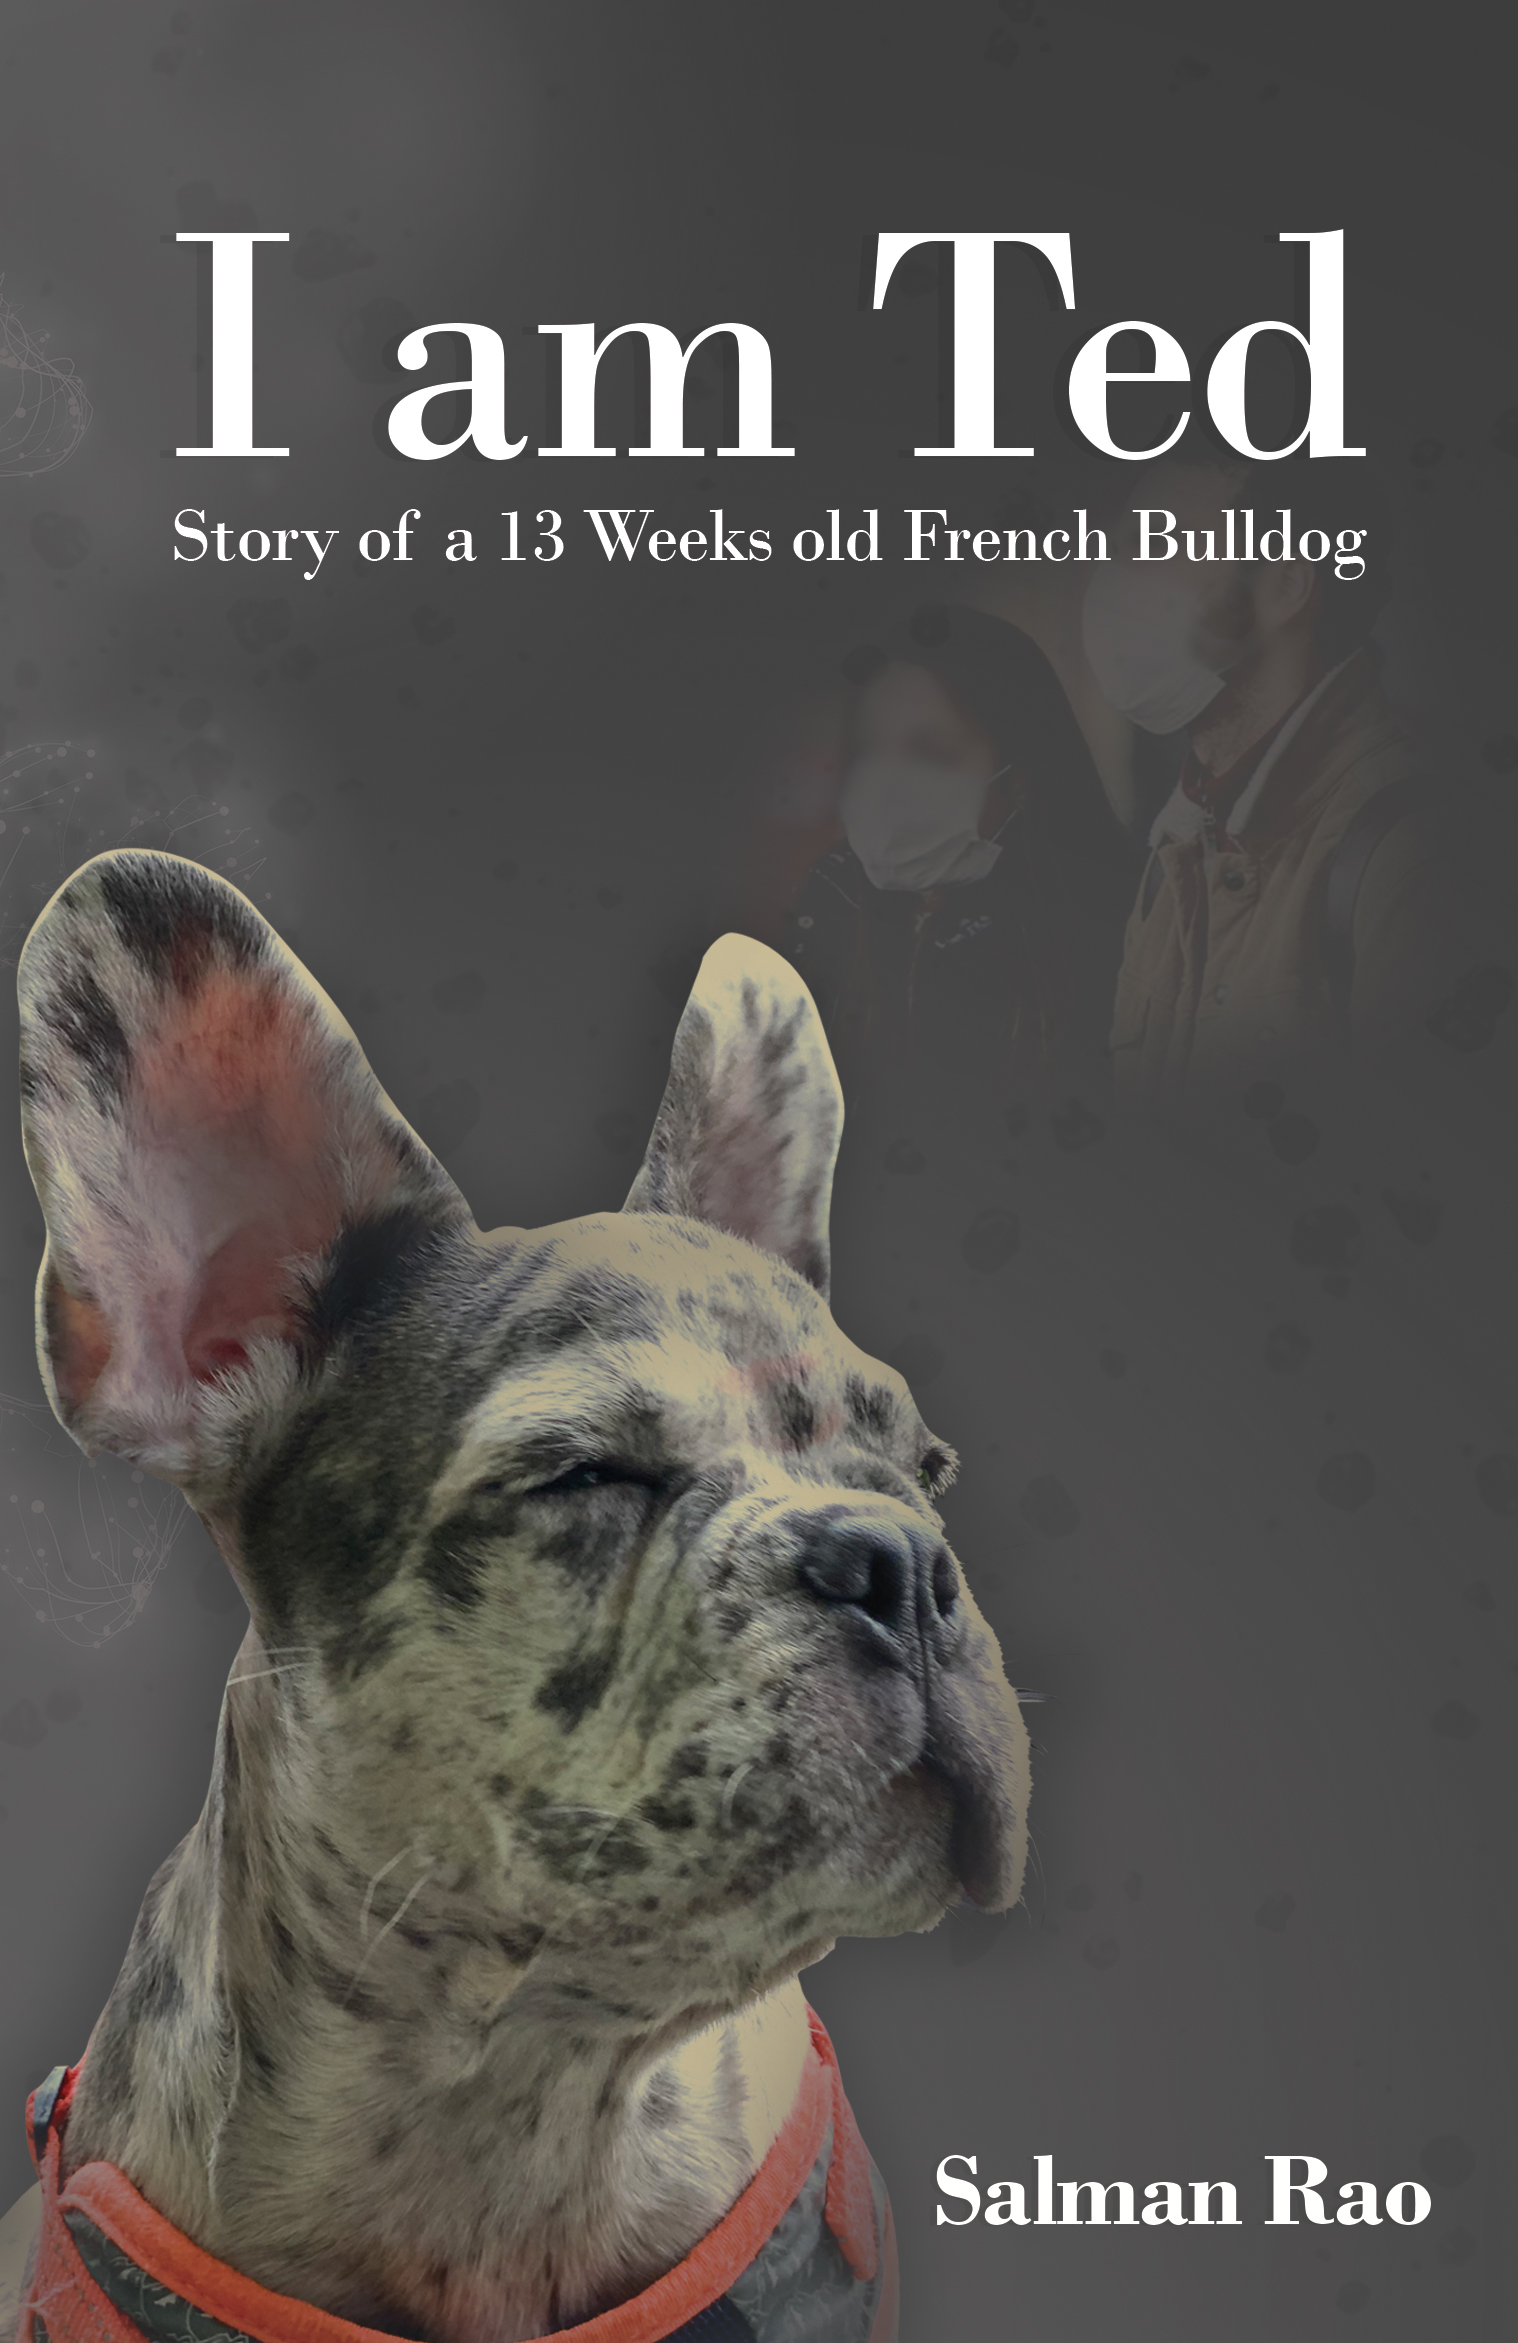 FREE: I am Ted; Story of a 13 weeks old French Bulldog by Salman Rao